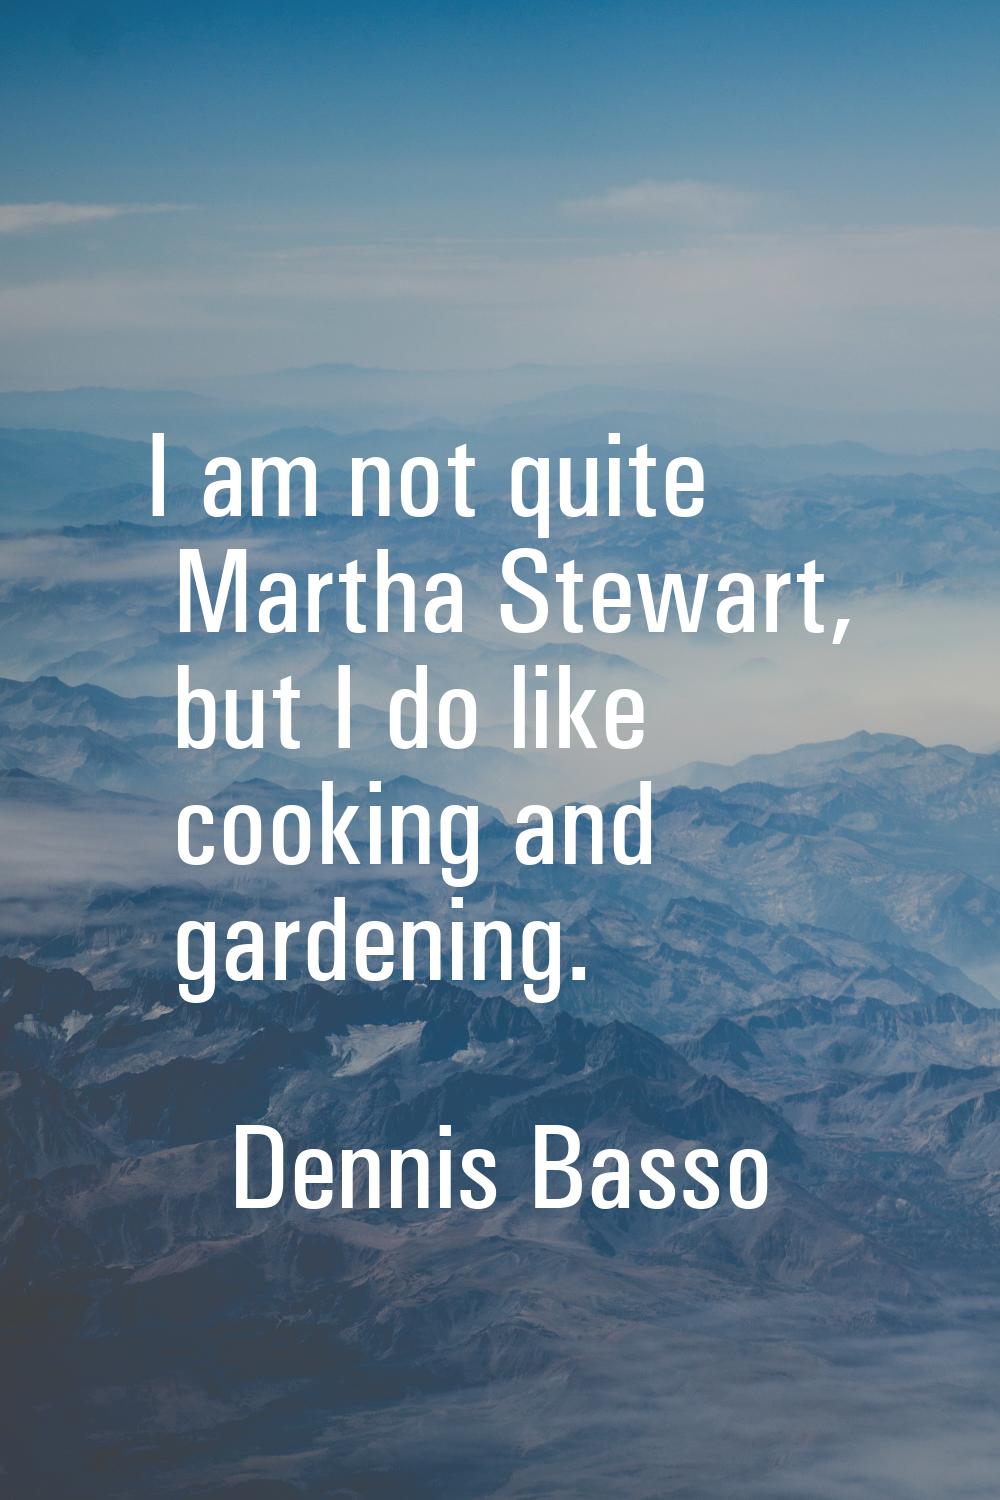 I am not quite Martha Stewart, but I do like cooking and gardening.